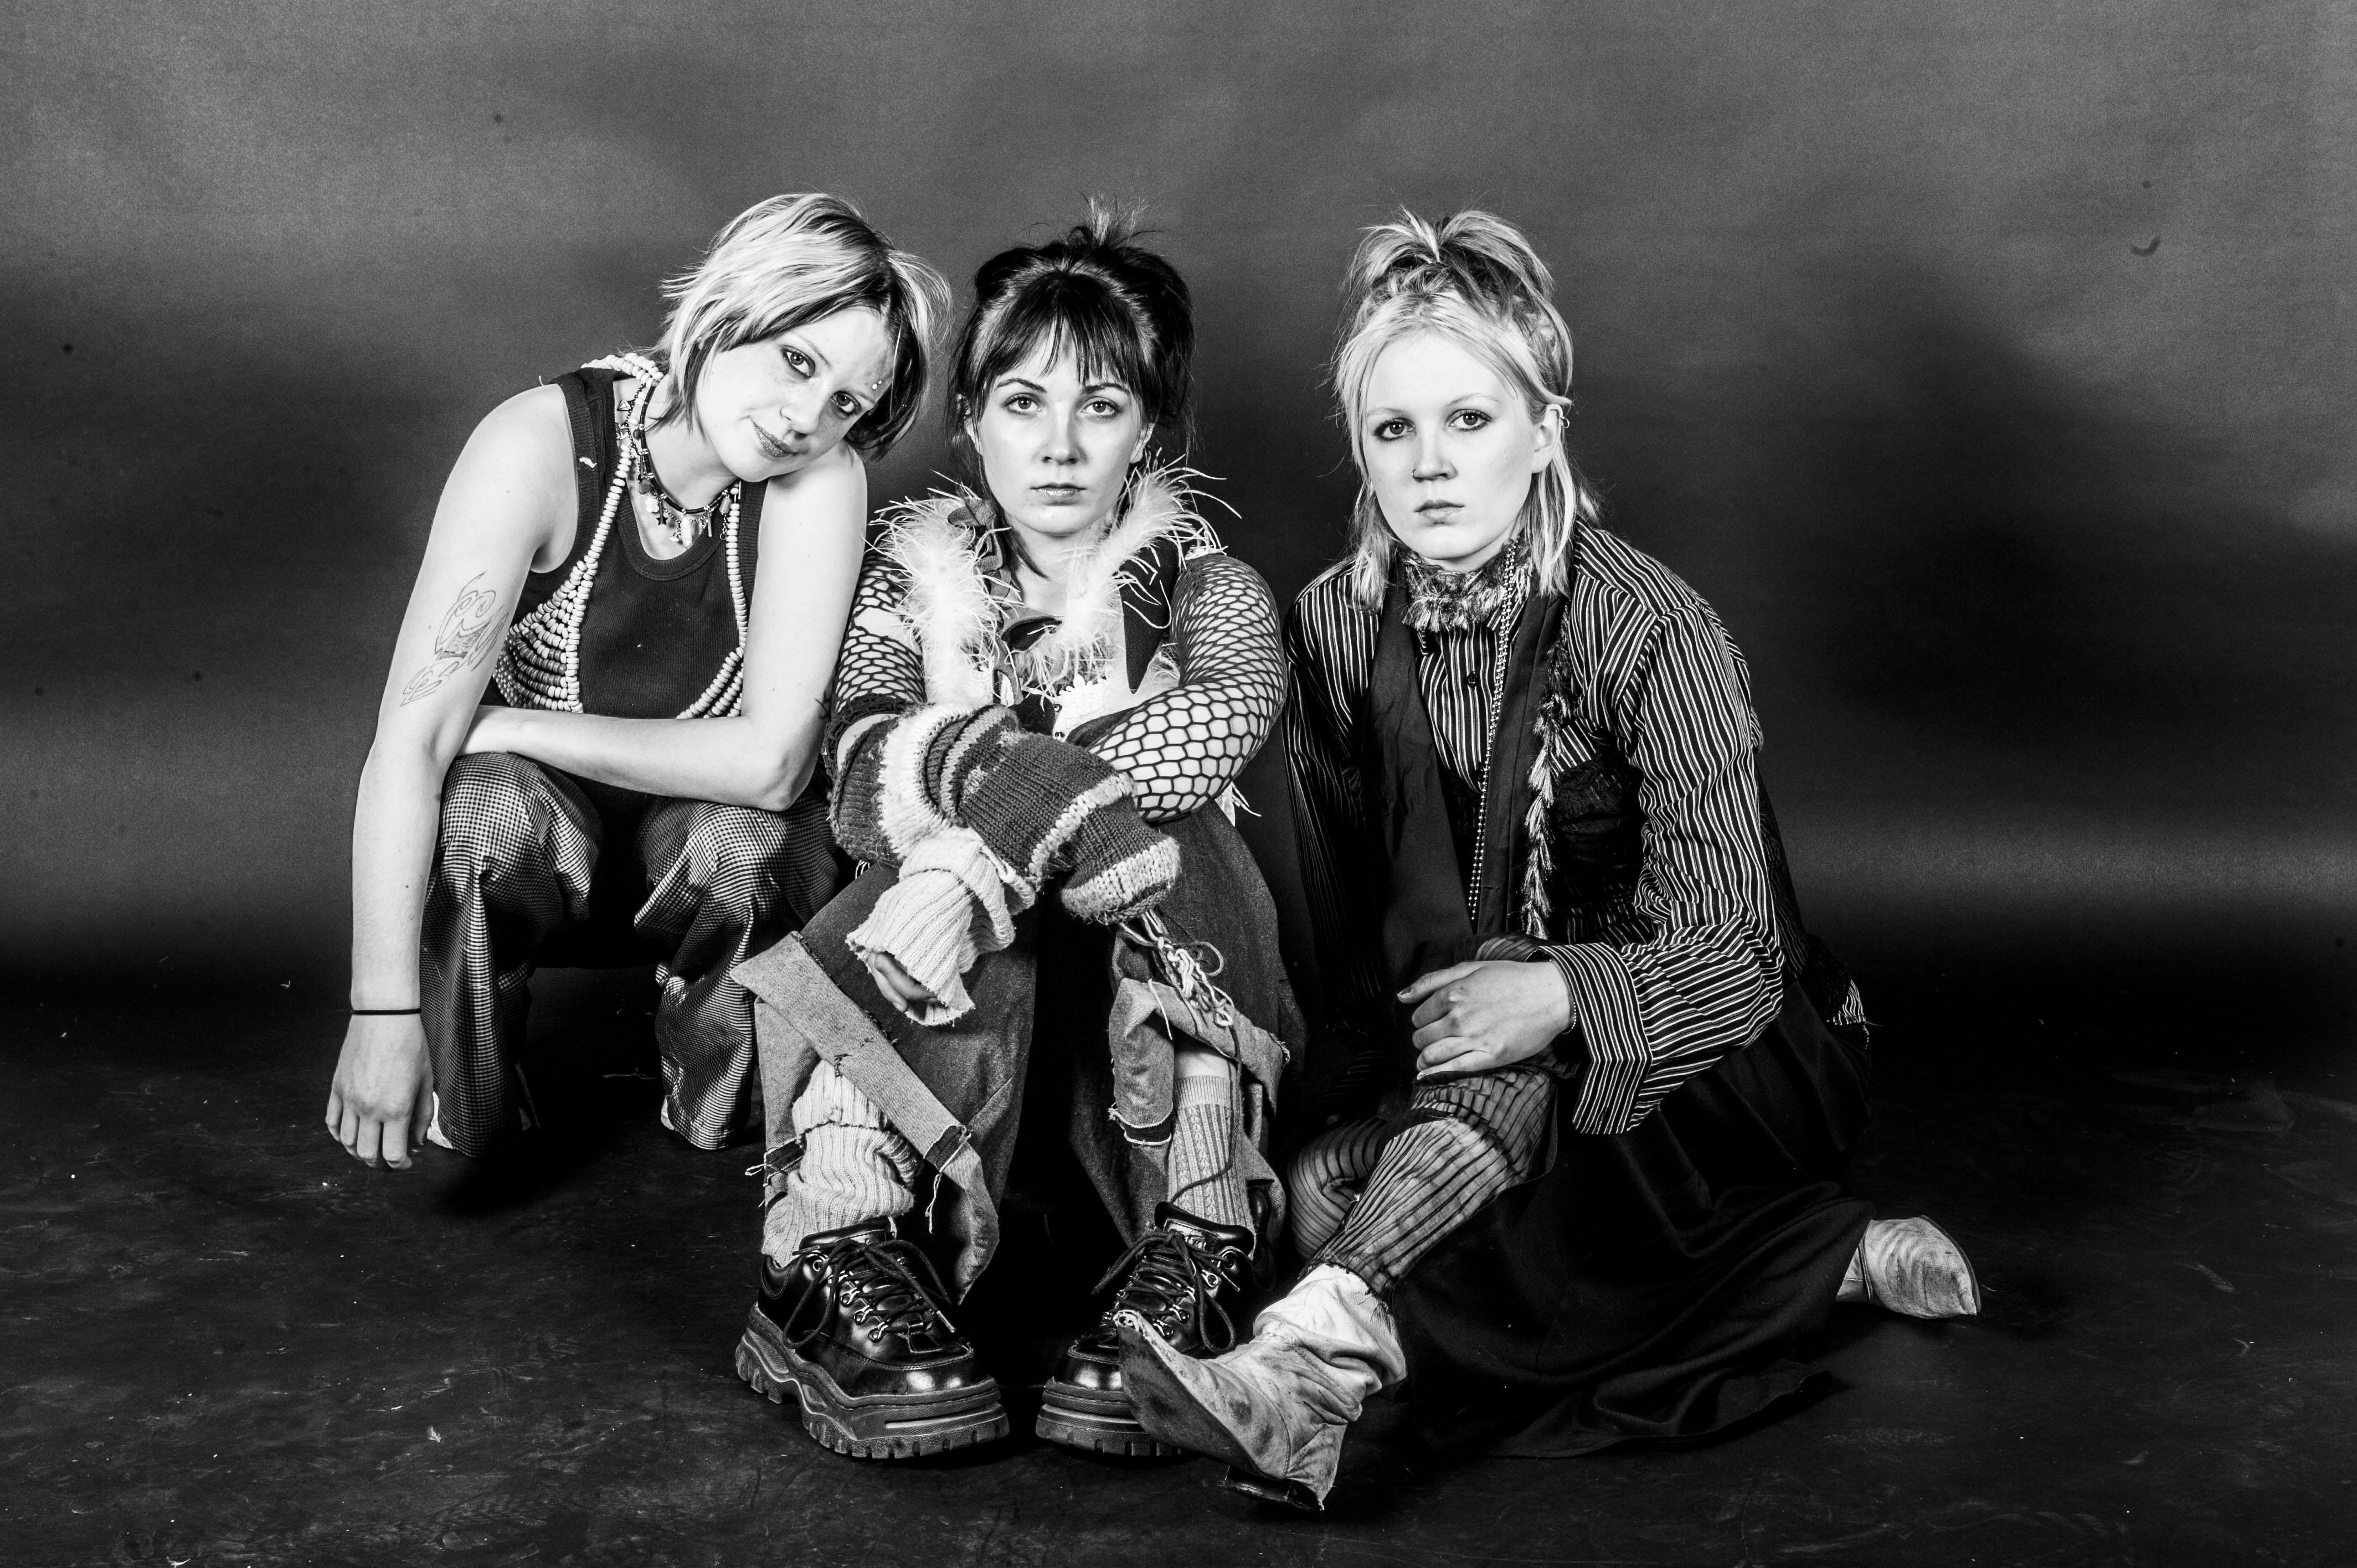 GRÓA is a trio comprised of sisters Hrabba and Karó and their childhood friend Fríða.